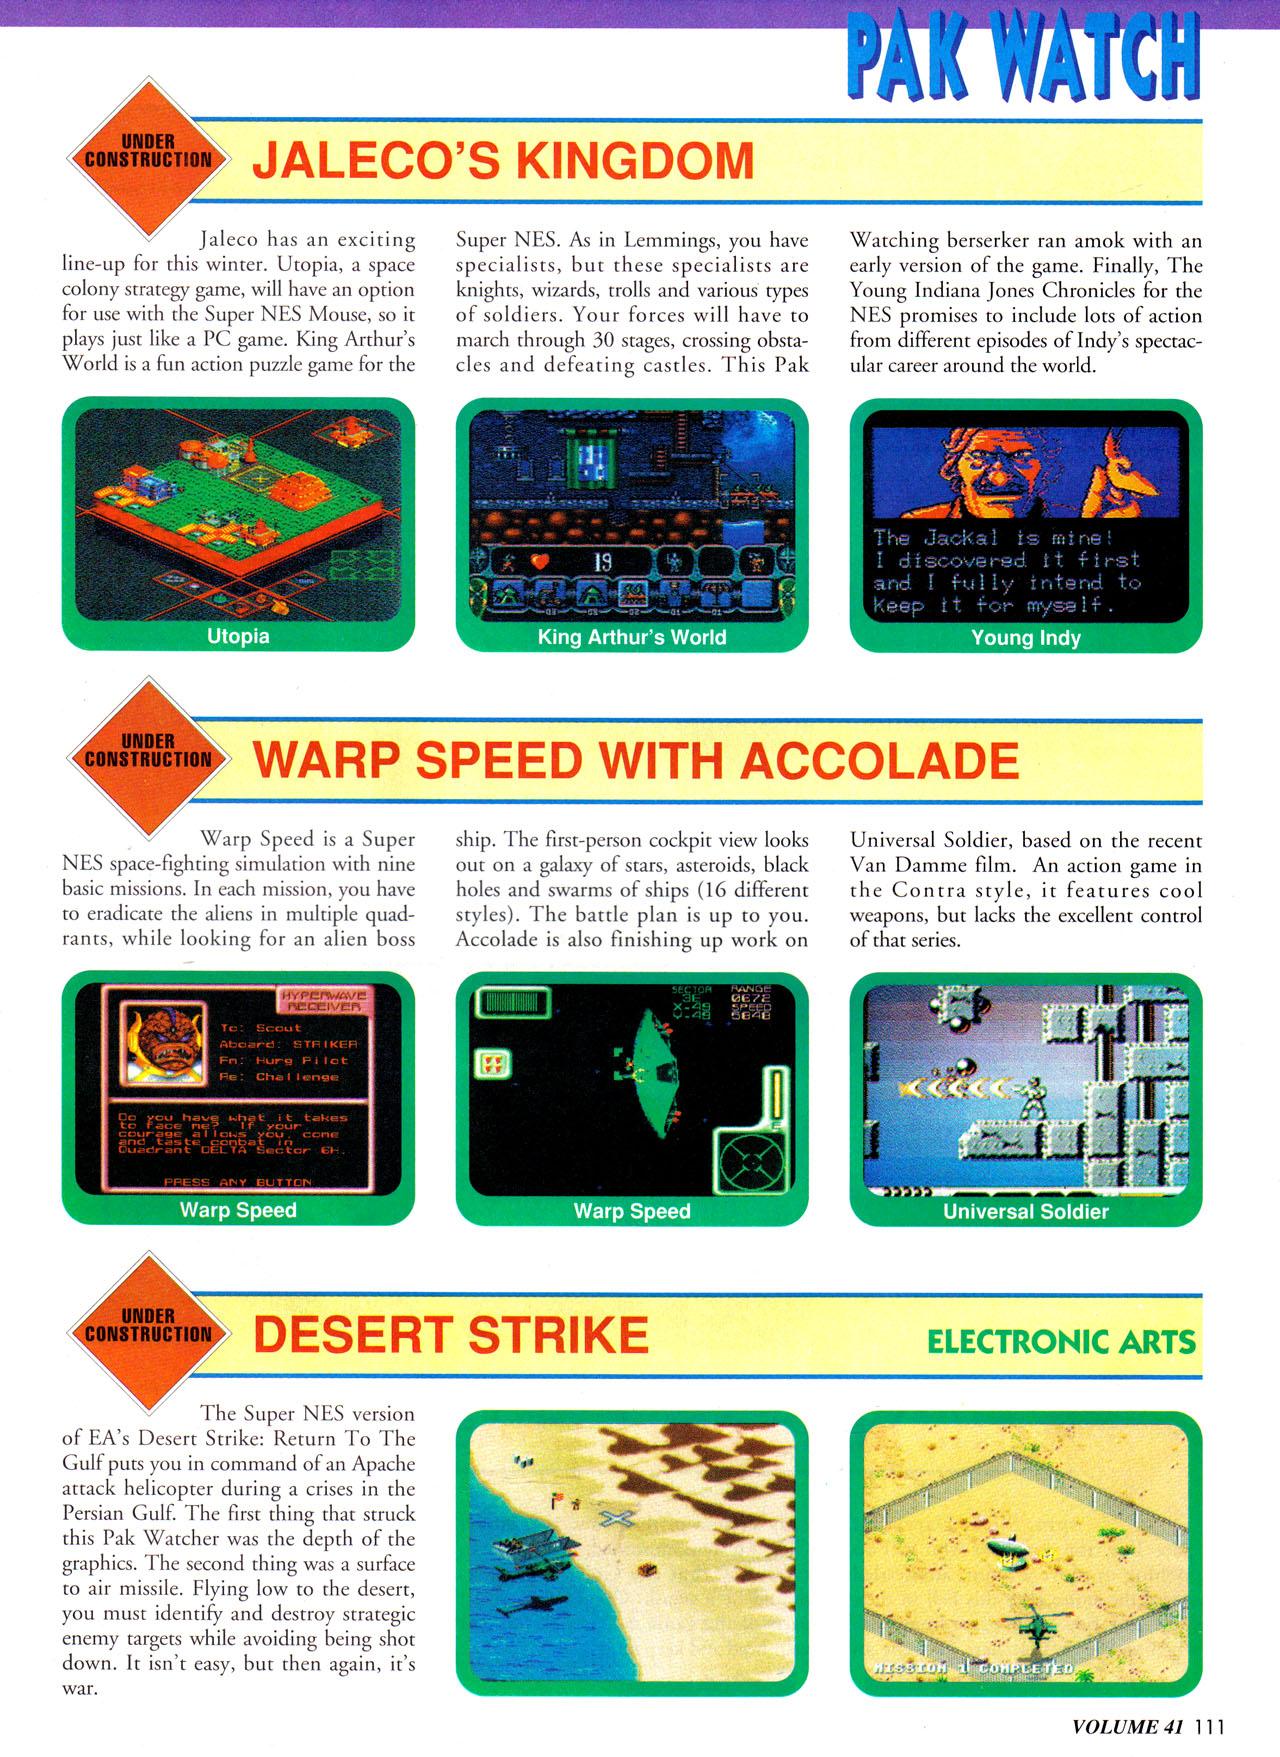 Preview in the October 1992 issue of Nintendo Power